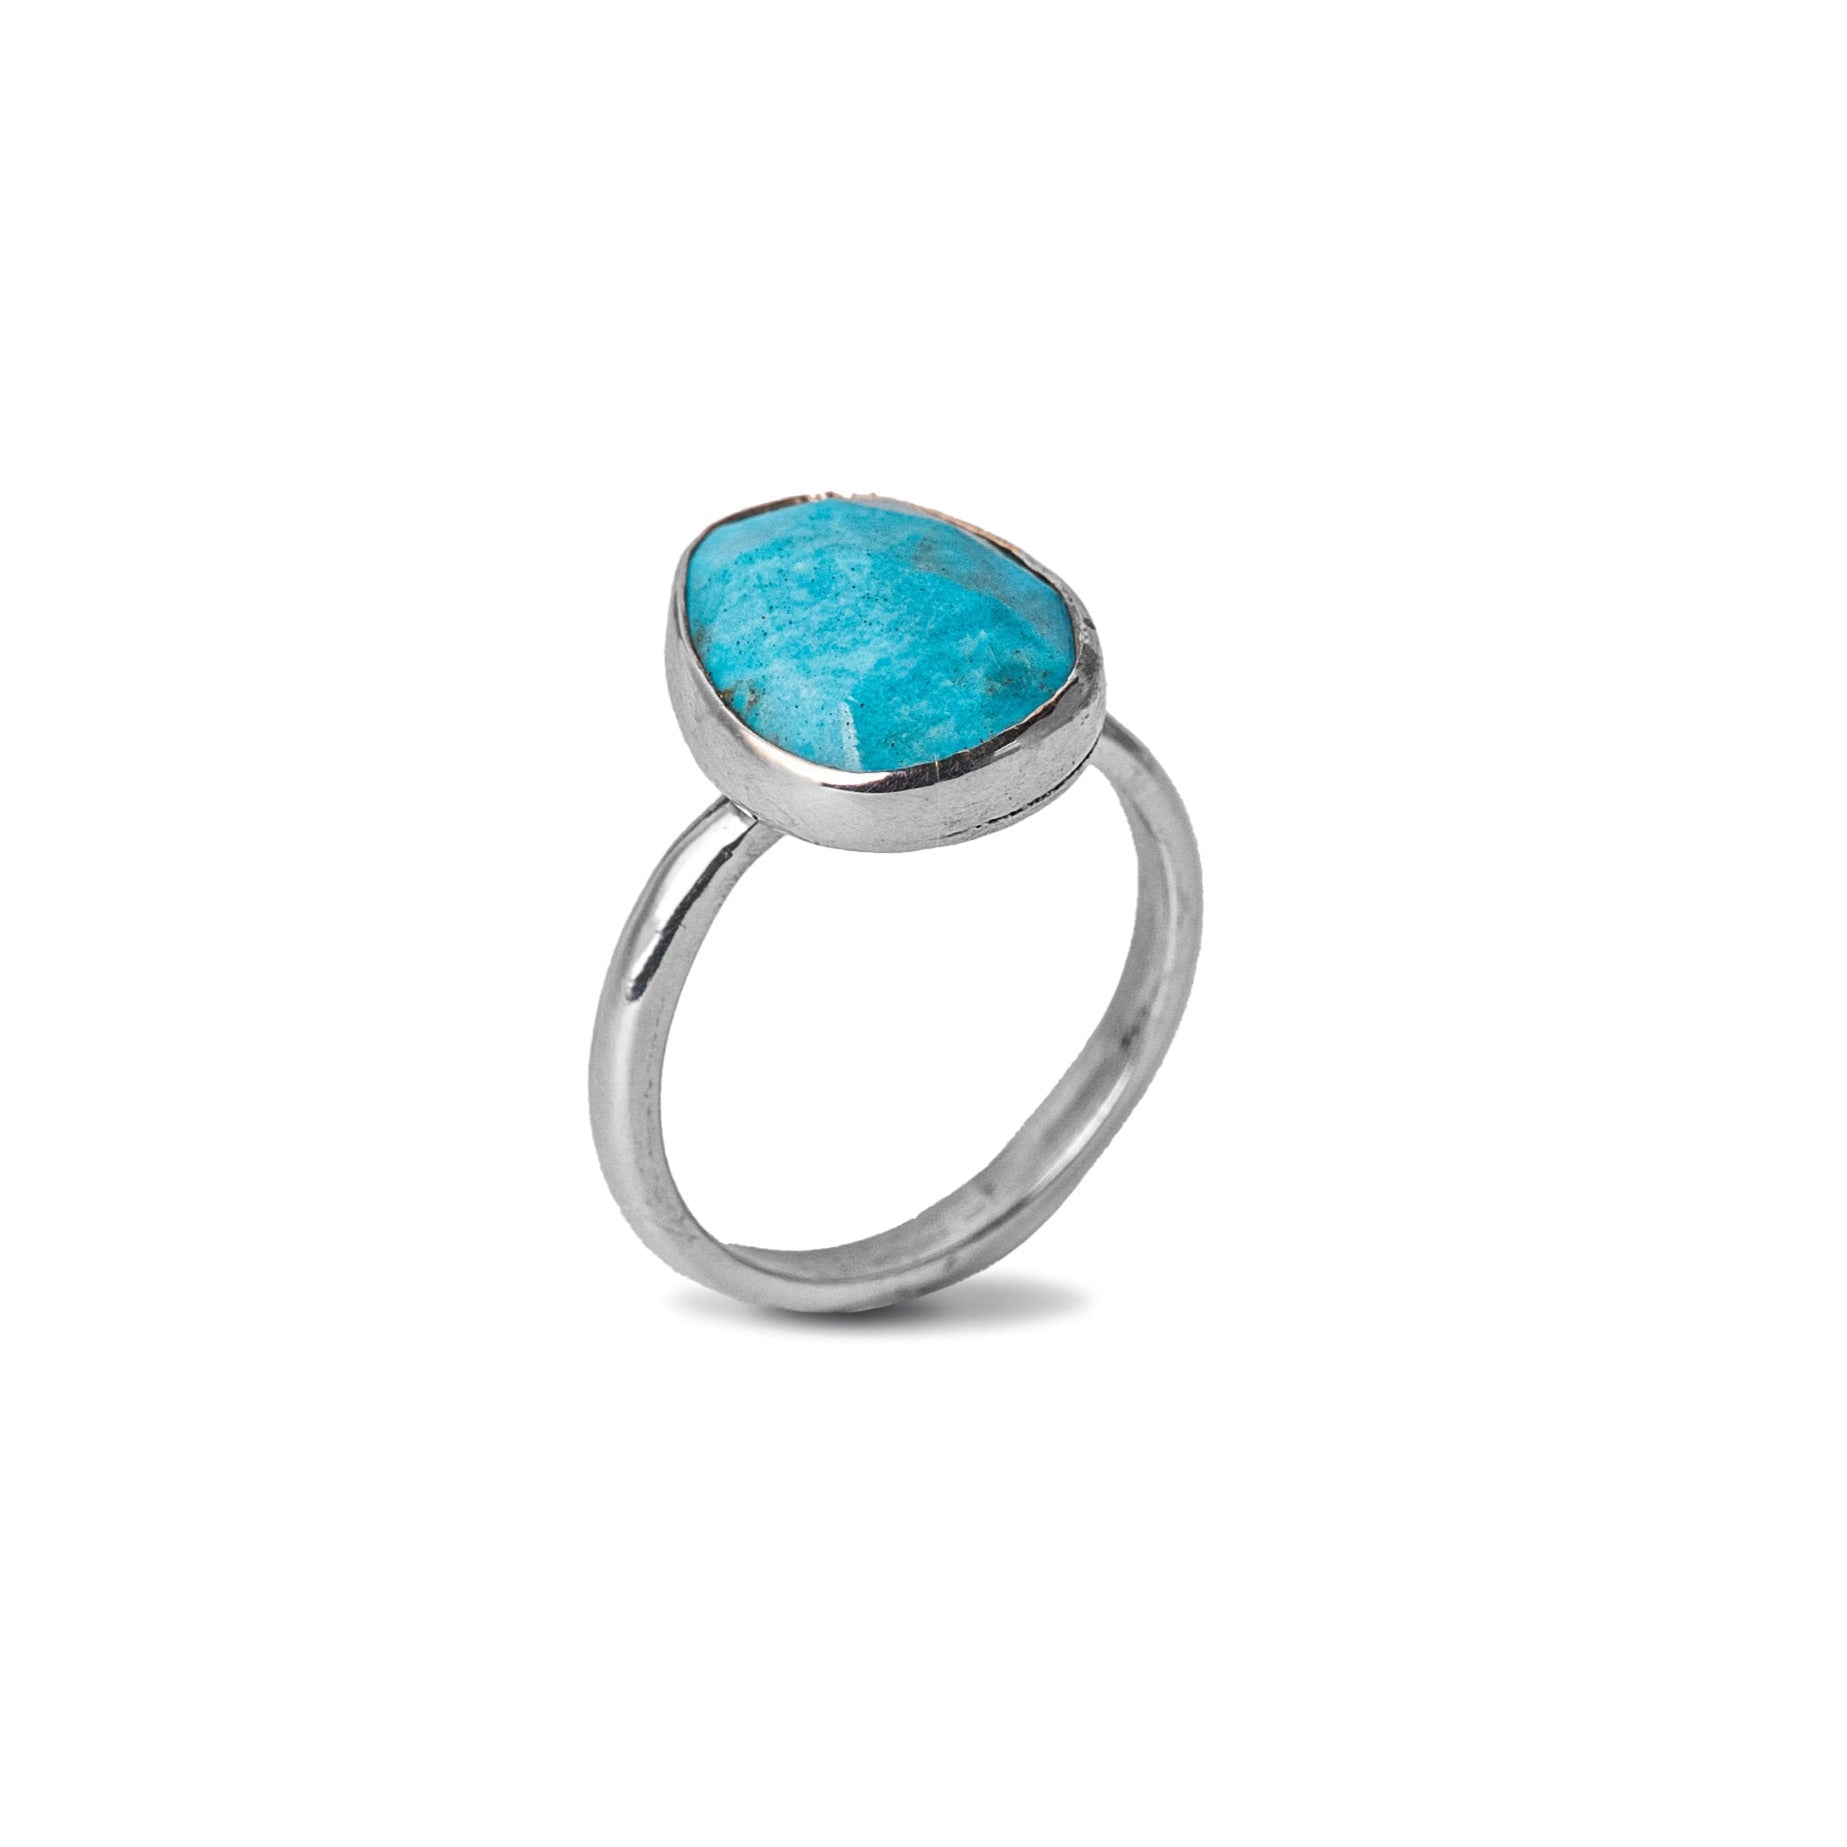 Tourquise Gemstone Sterling Silver Ring on White Background at a angled tilt 